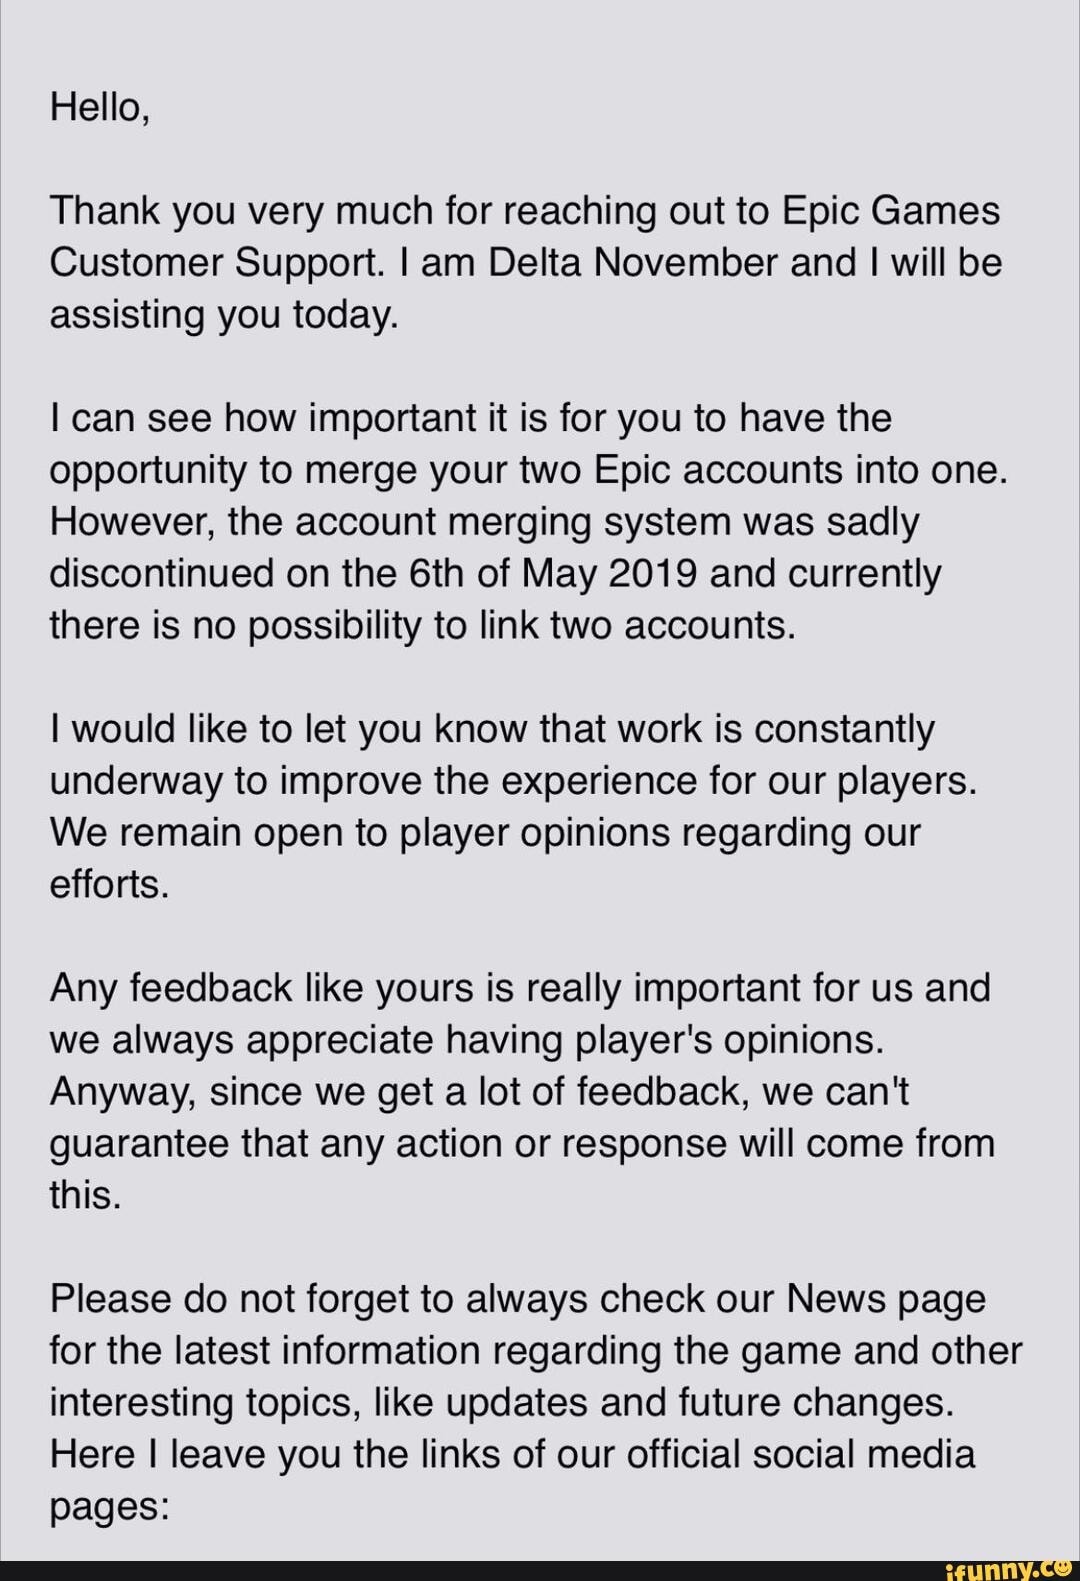 Hello Thank You Very Much For Reaching Out To Epic Games Customer Support I Am Delta